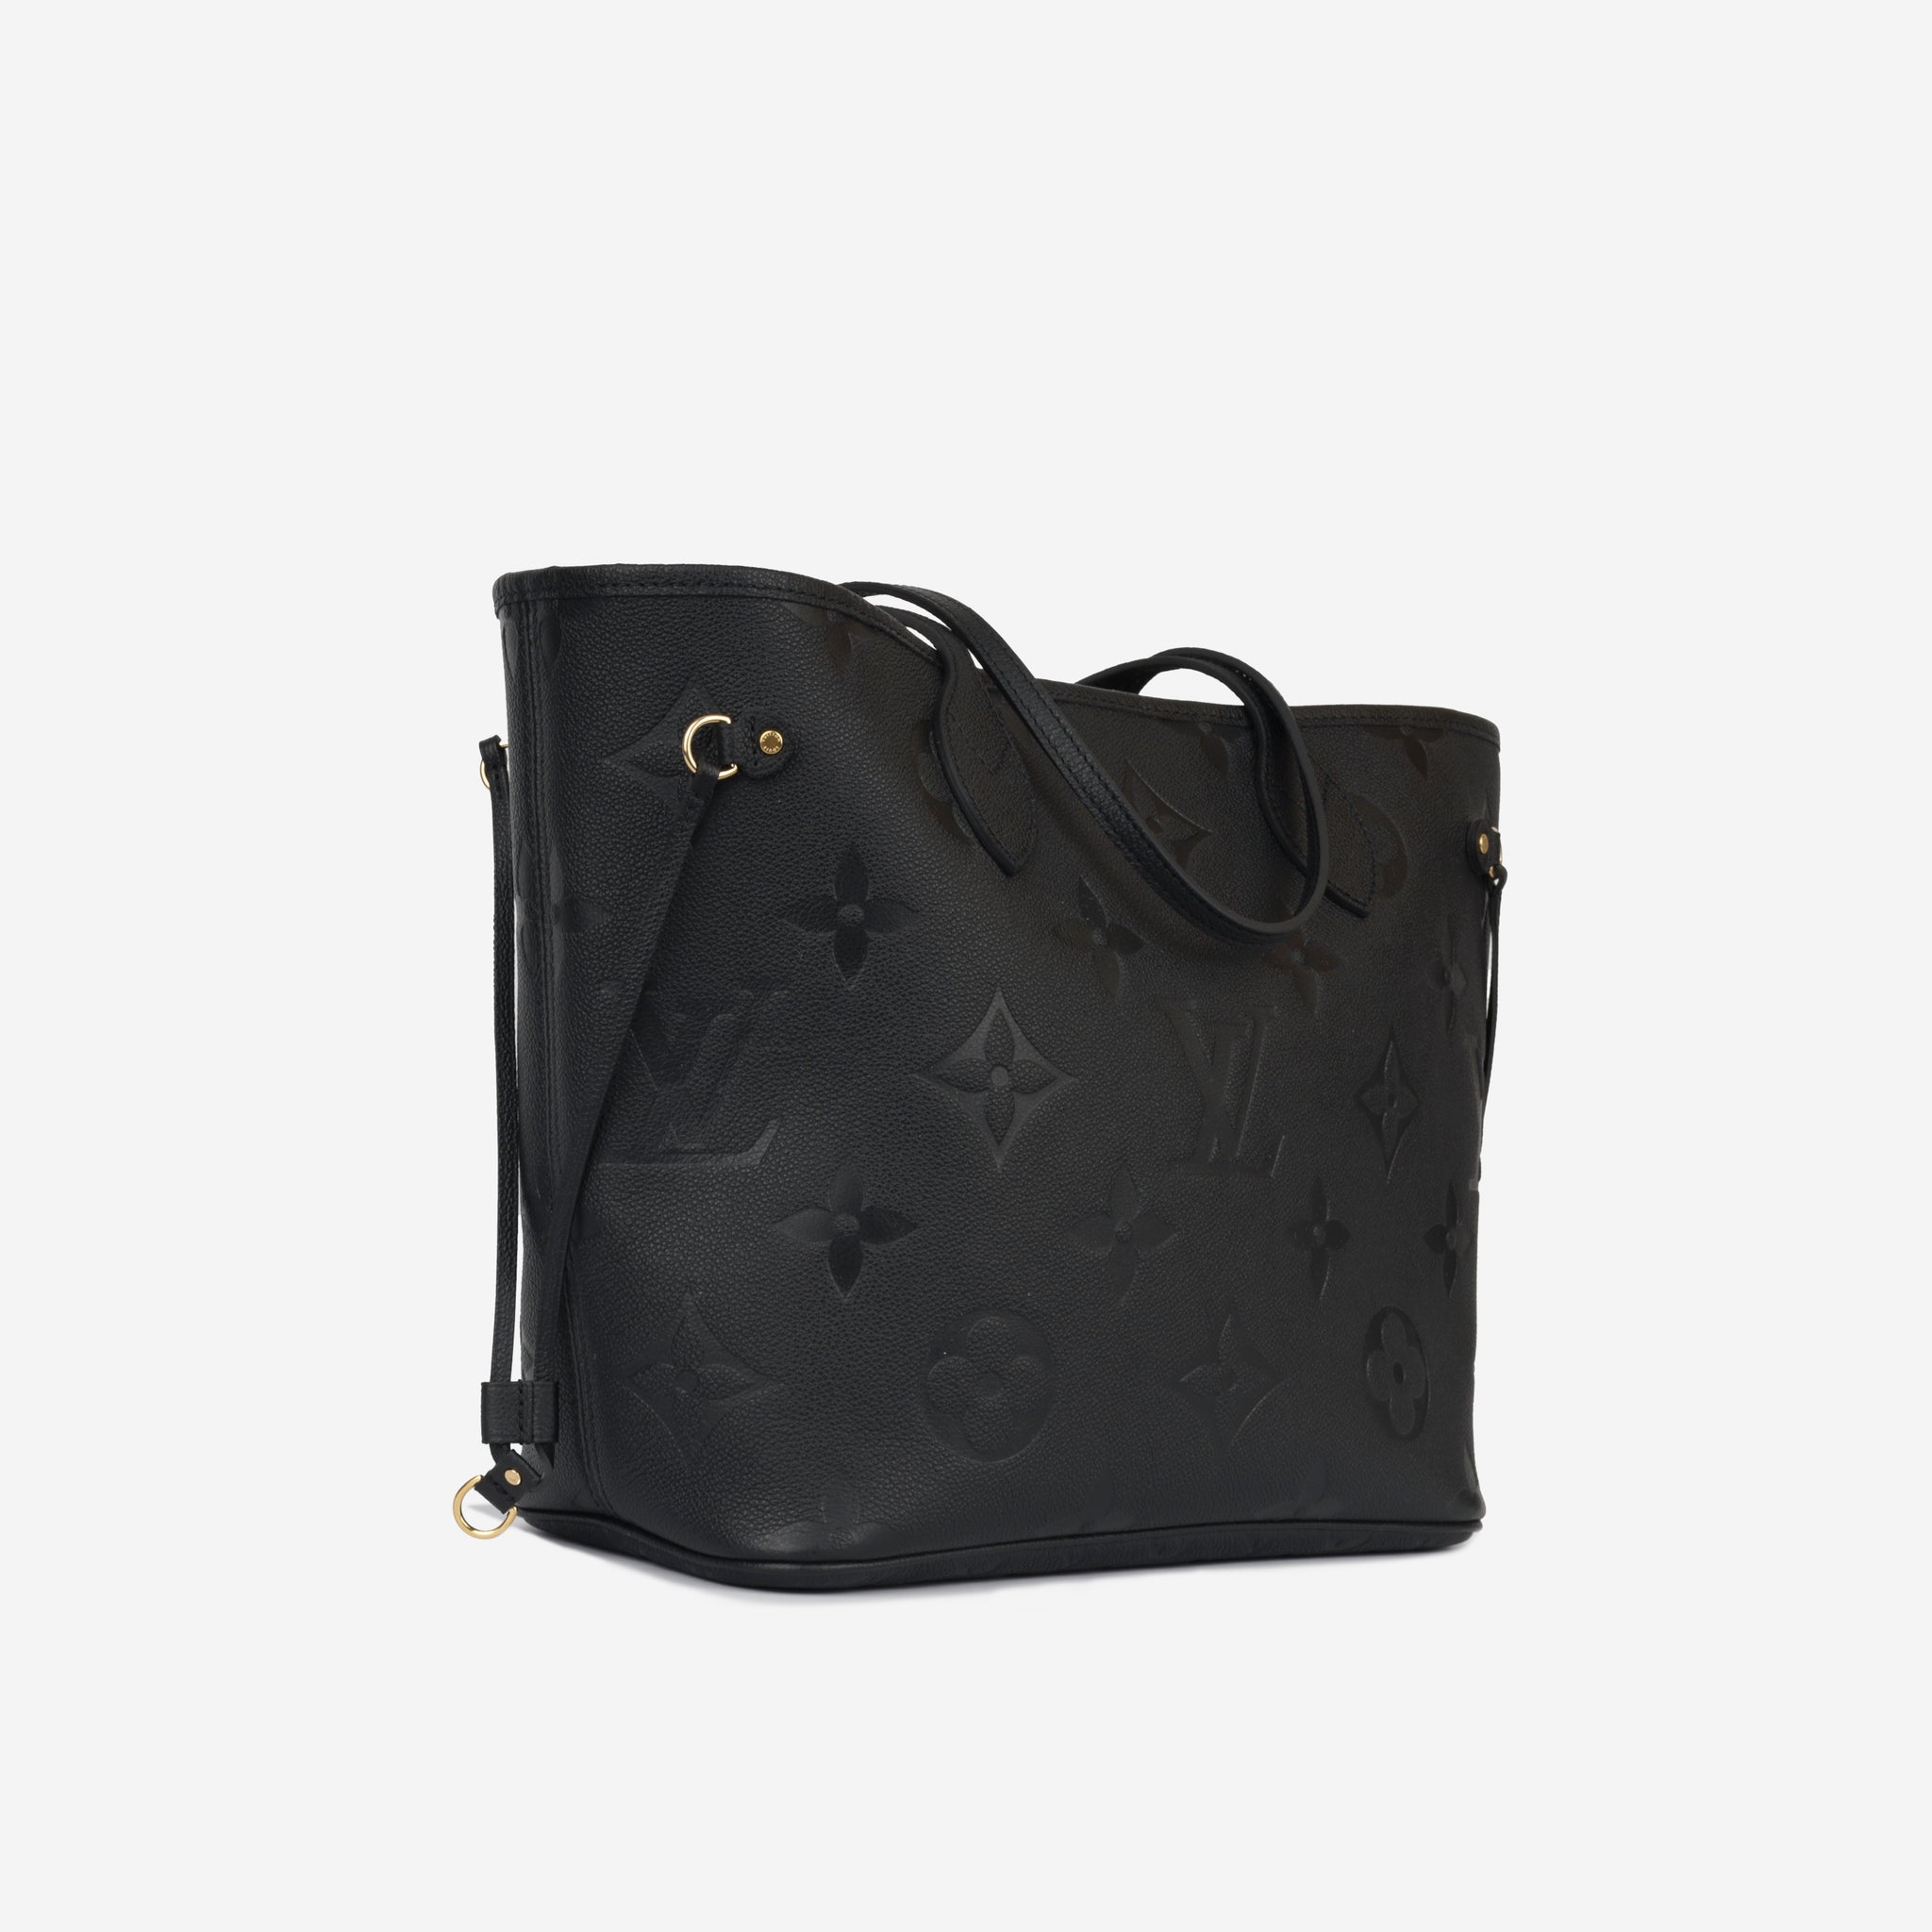 Ultimate version carryall p.m. size in black empreinte leather